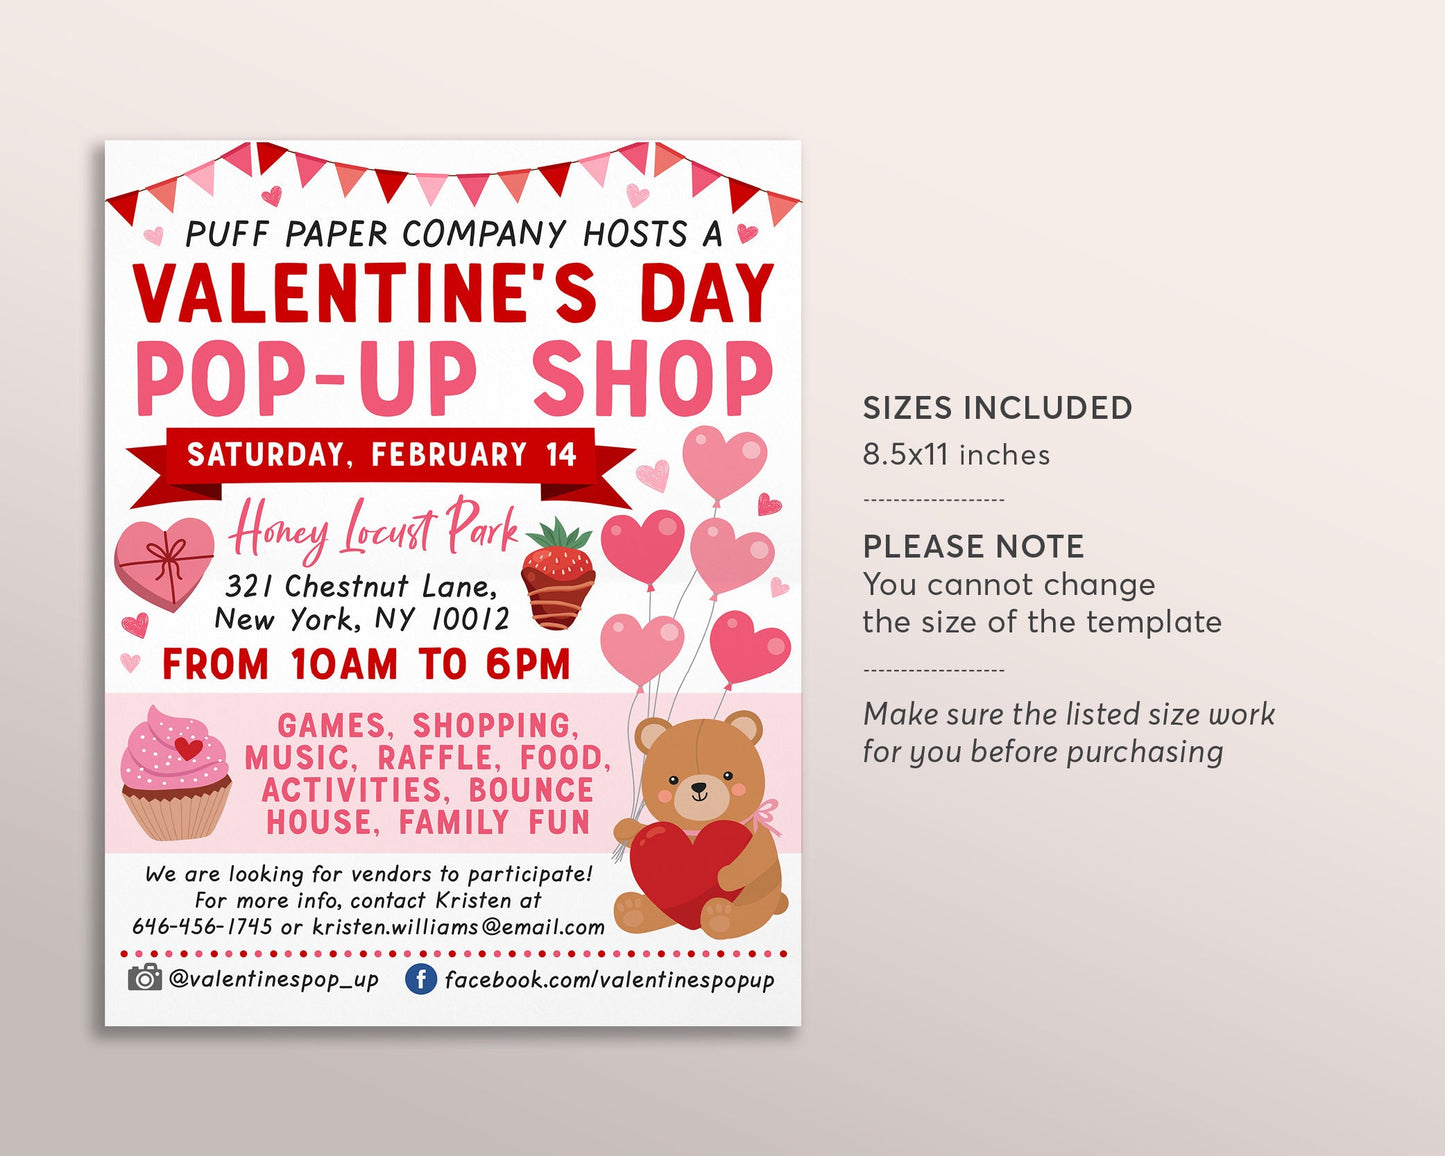 Valentine's Day Pop Up Shop Flyer Editable Template, Valentine Party Shopping Pop Up Store Fundraiser, Business Charity Non Profit Event